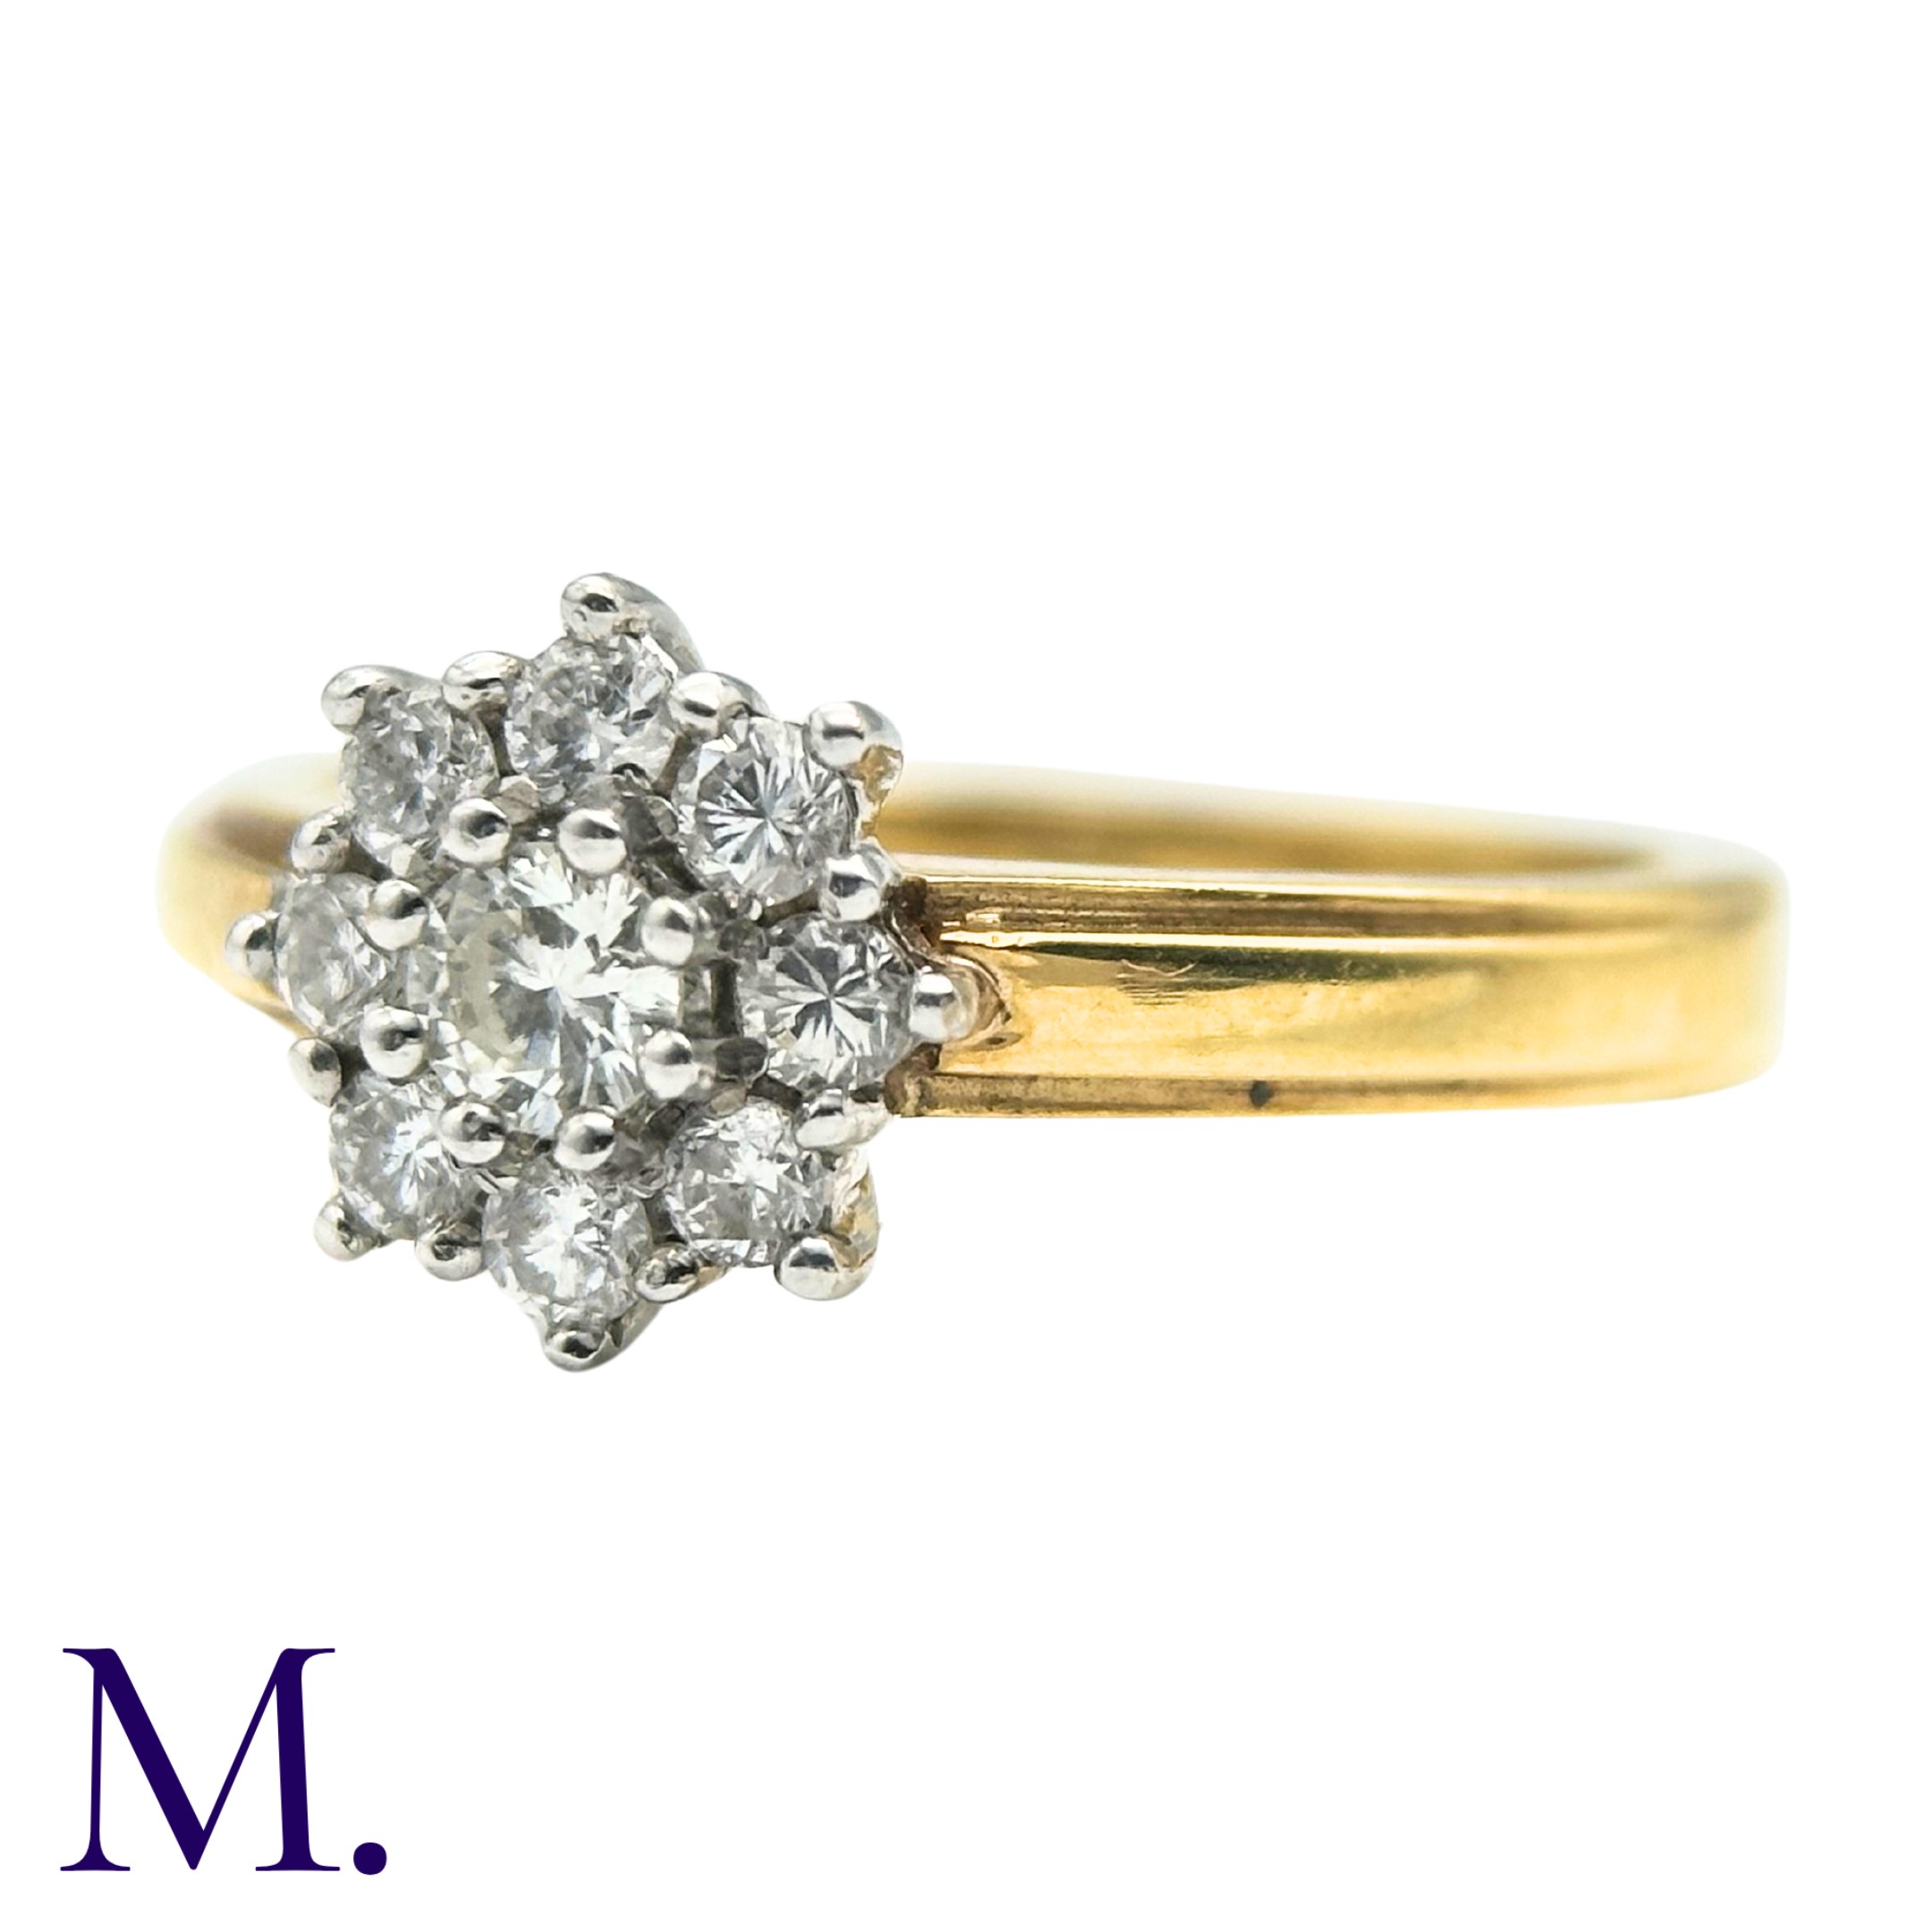 A Diamond Cluster Ring in 18k yellow gold, set with a cluster of round cut diamonds. Hallmarked